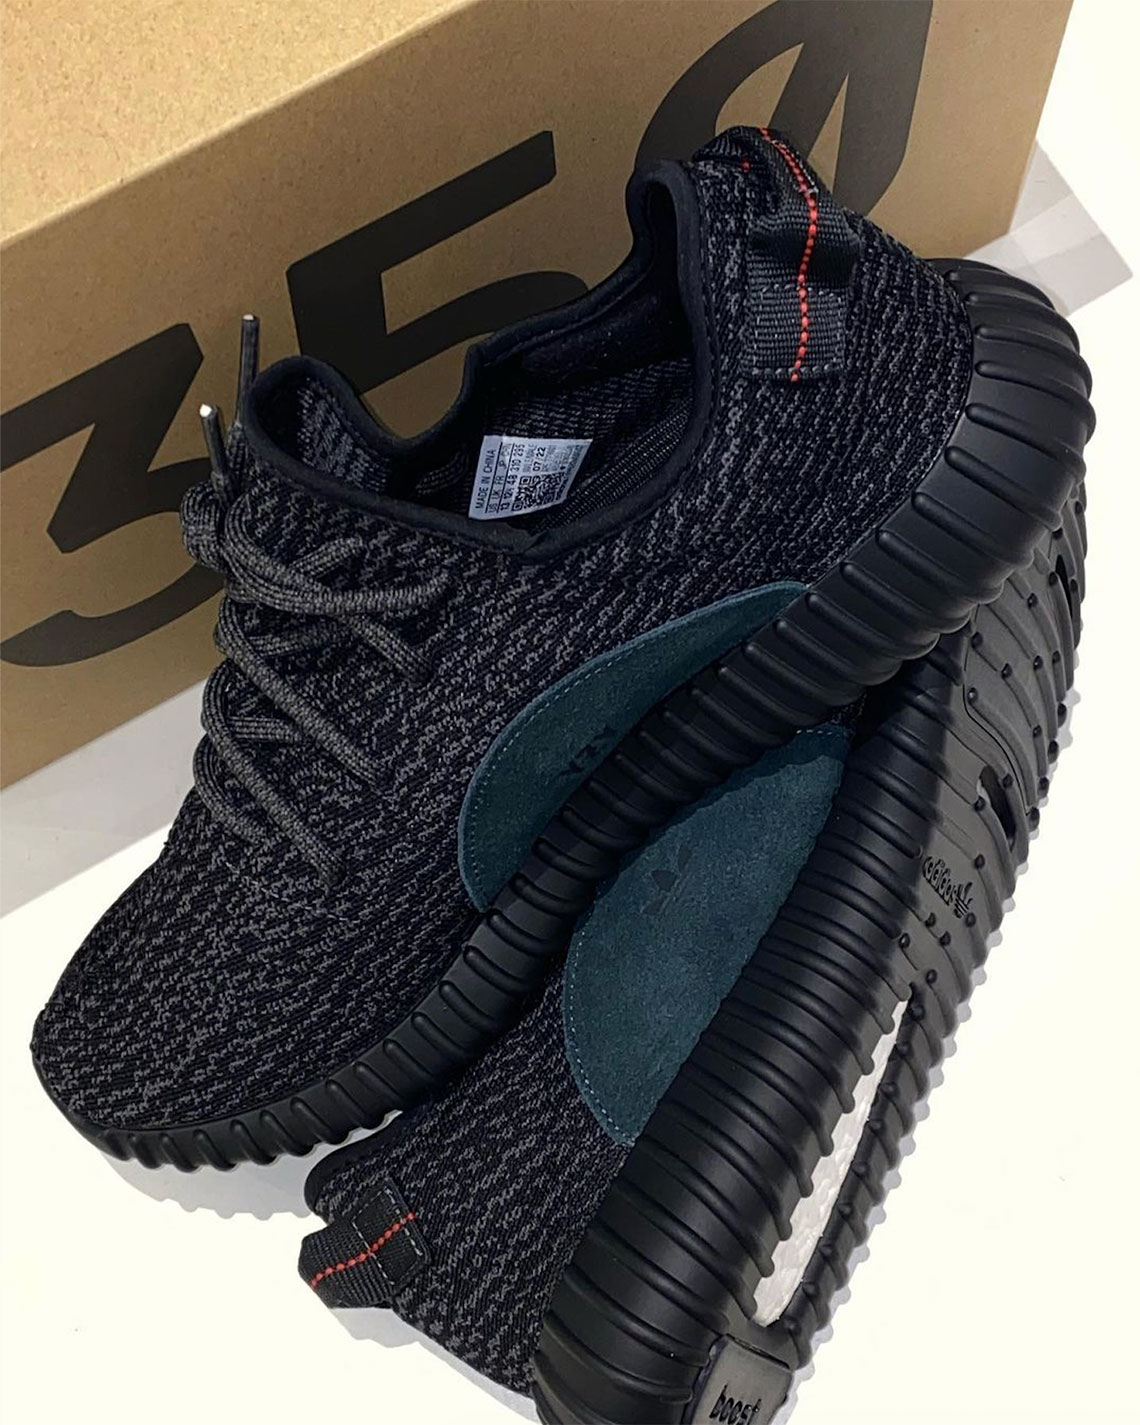 gennemsnit Lake Taupo Officer adidas Yeezy Boost 350 "Pirate Black" 2023 Release Info | SneakerNews.com